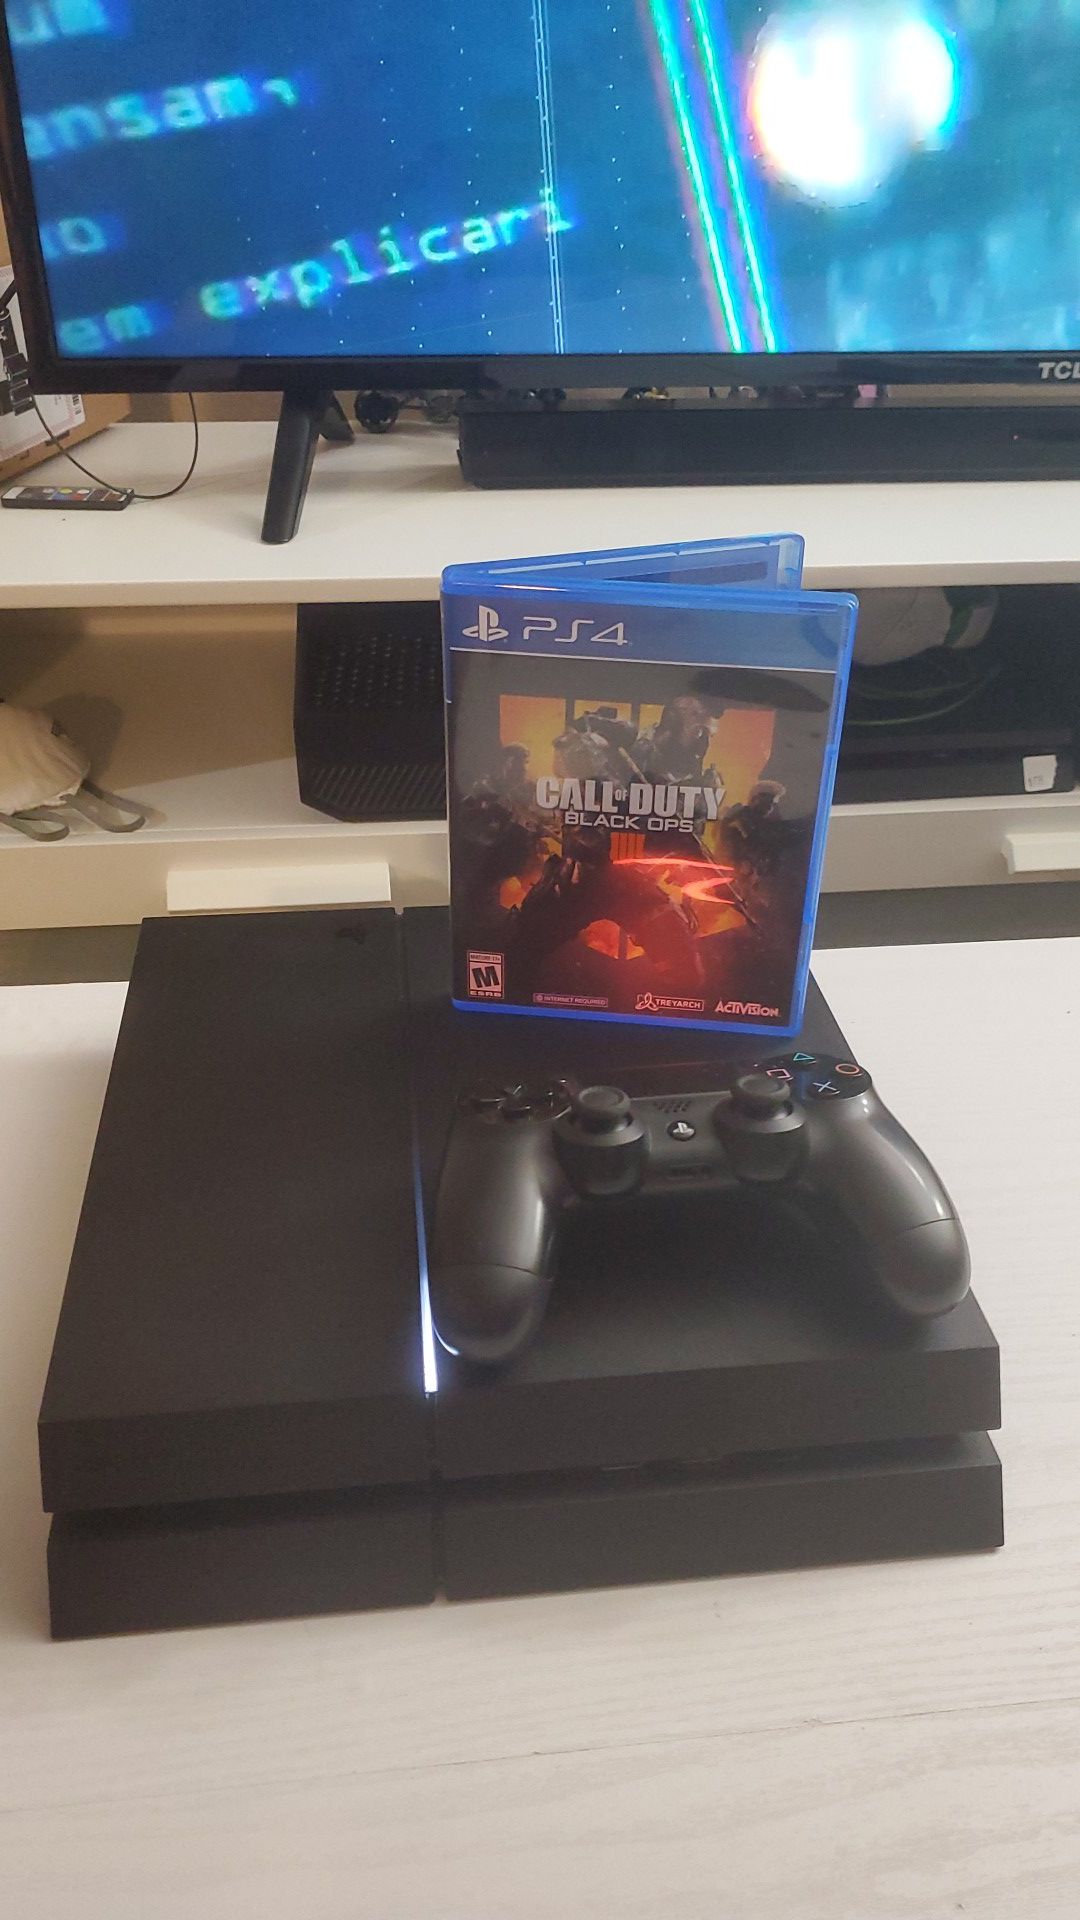 PS4 + 1 game + 1 controller